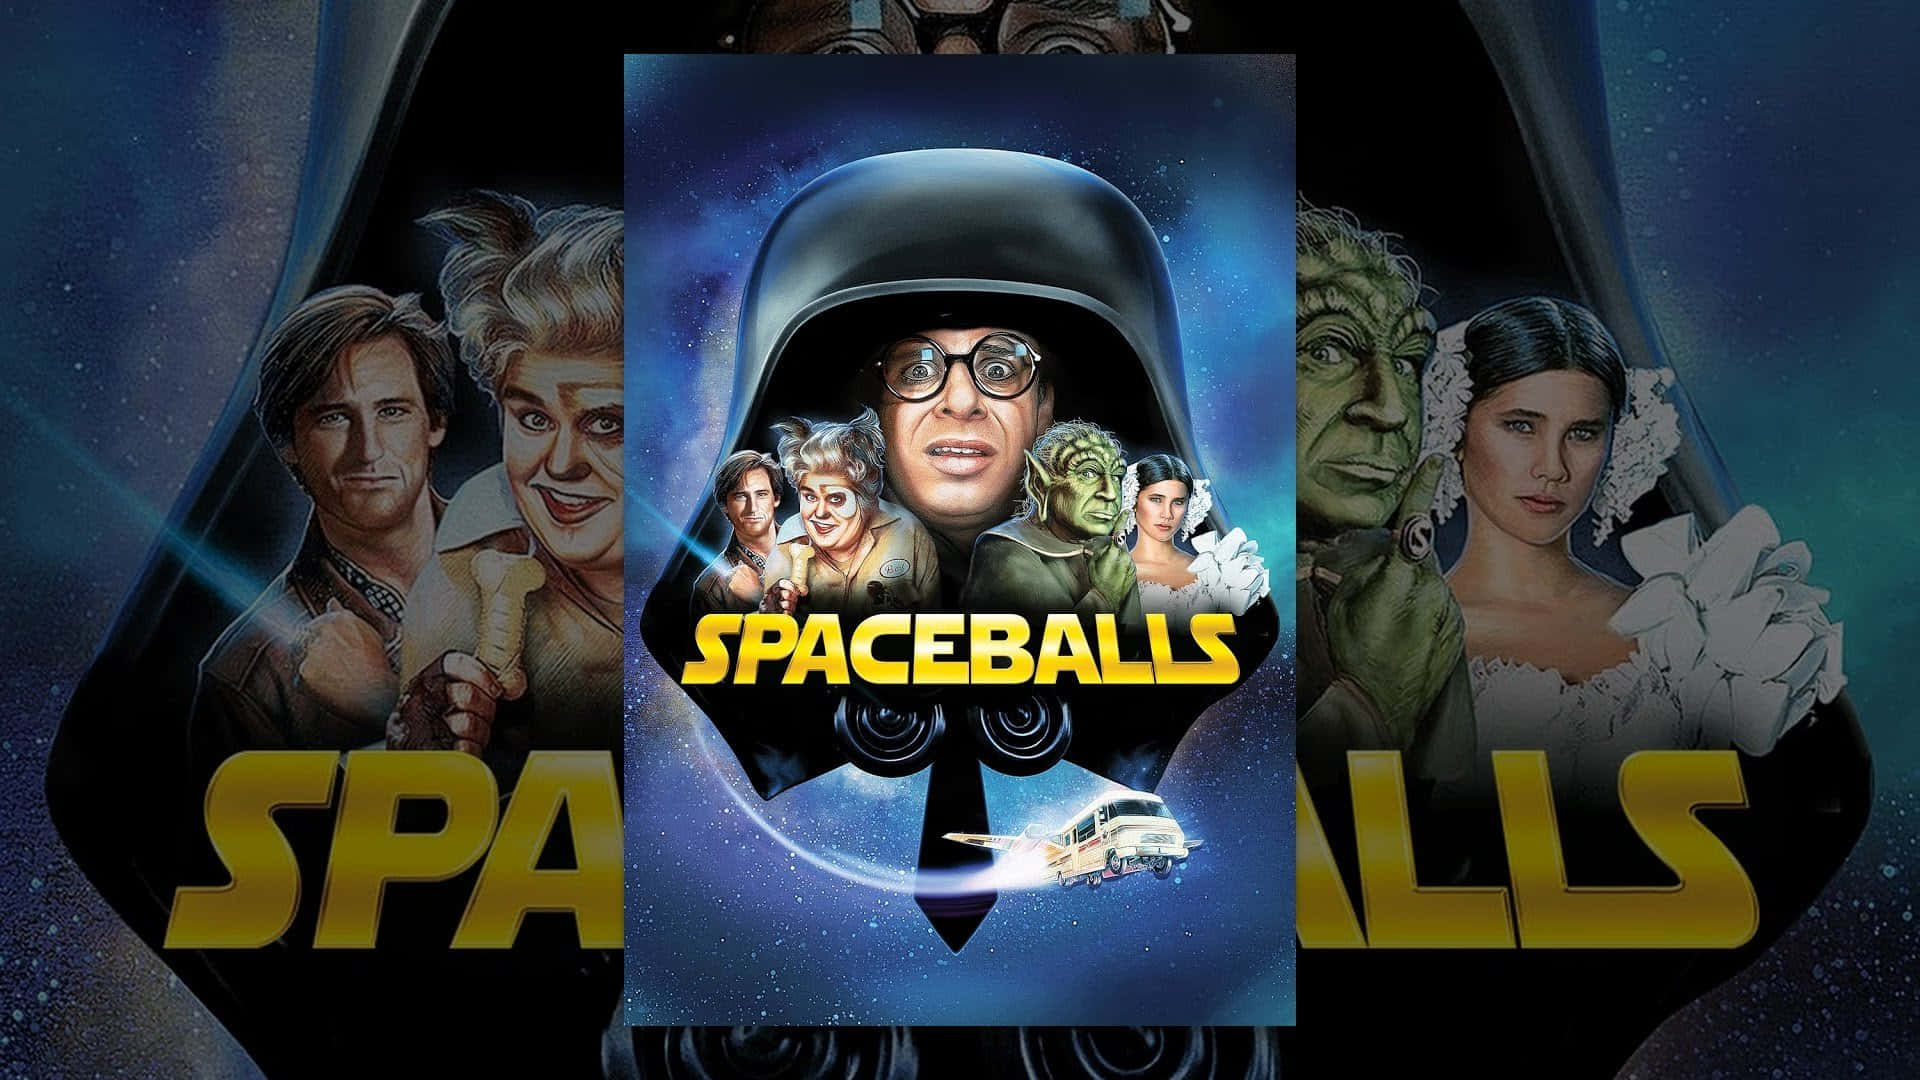 Spaceballs - A Movie Poster With A Group Of Characters